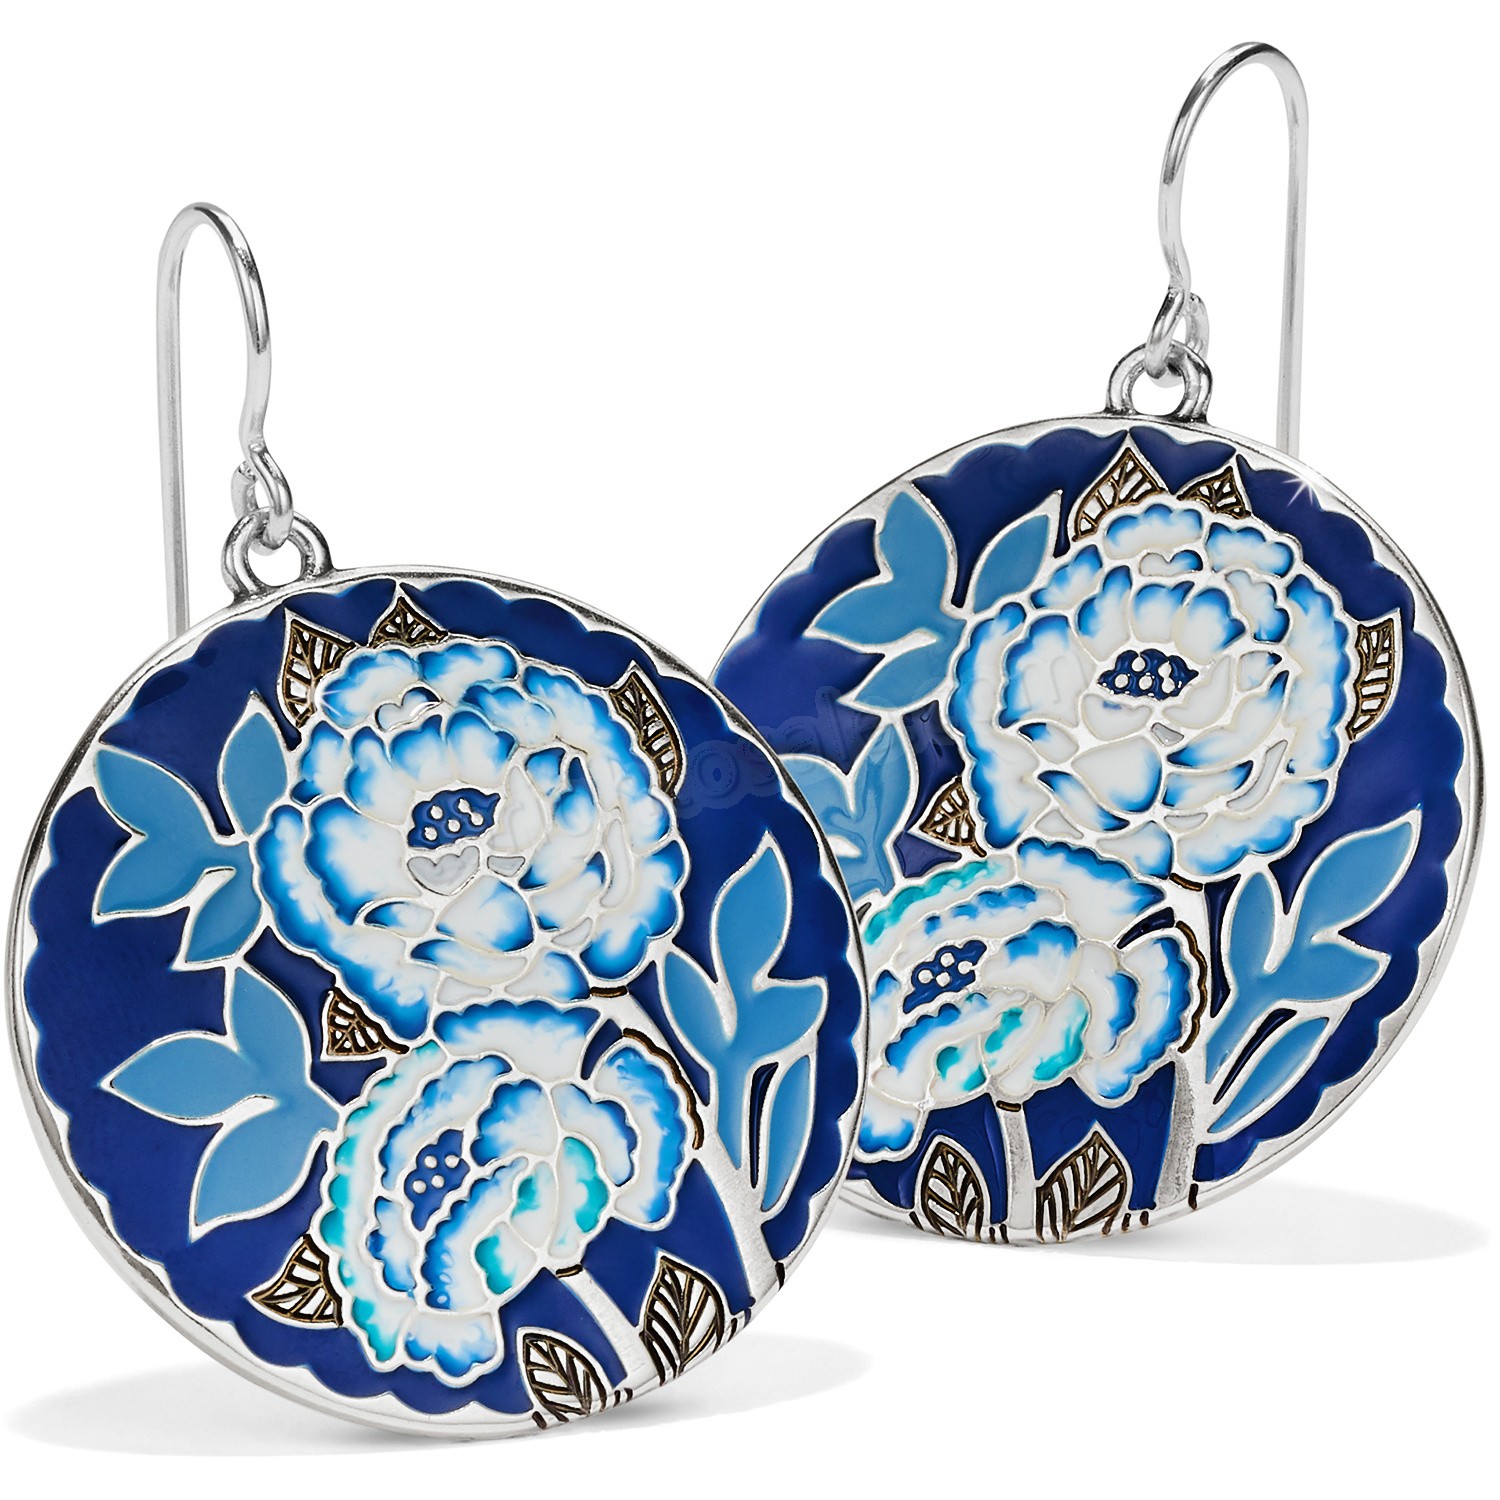 Brighton Collectibles & Online Discount Journey To India Indigo French Wire Earrings - Brighton Collectibles & Online Discount Journey To India Indigo French Wire Earrings